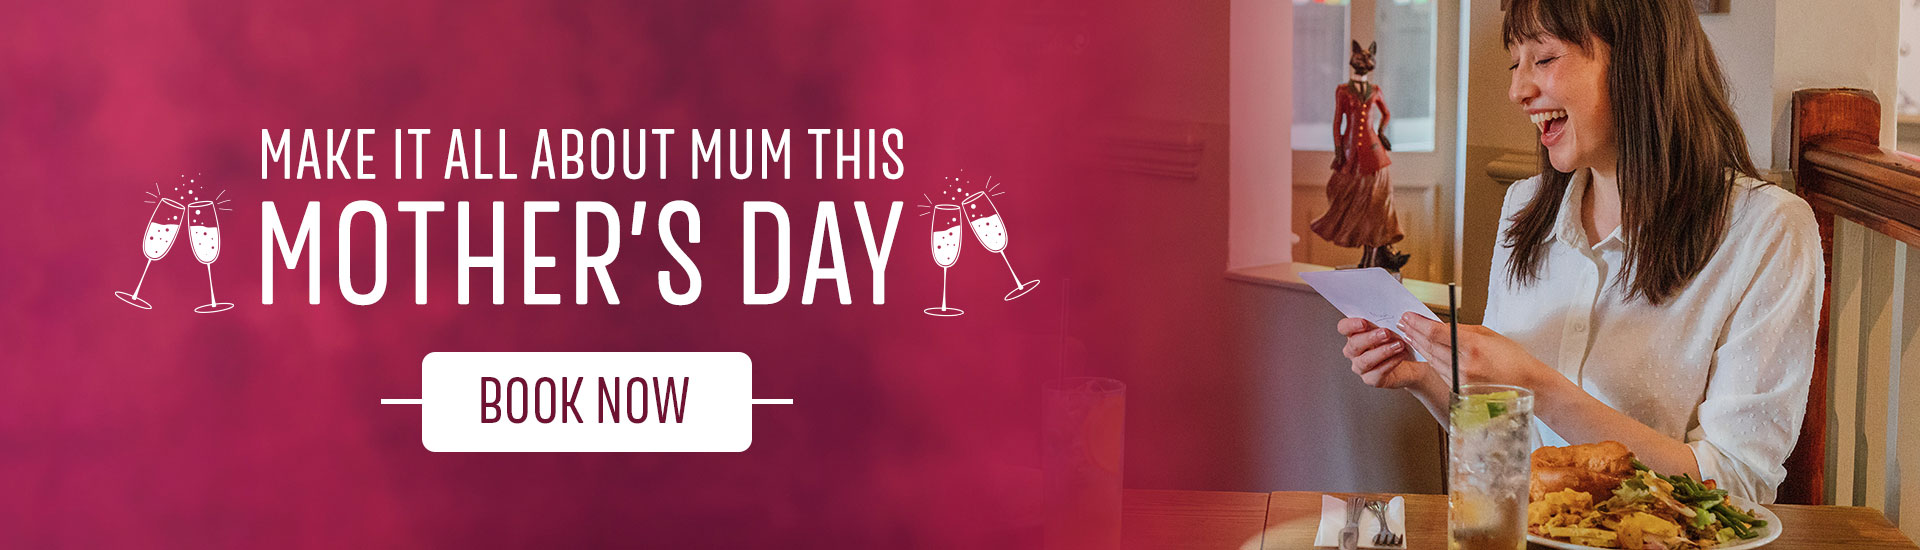 Mother’s Day in Buckhurst Hill, Mother’s Day 2023, Mother’s Day at Toby Carvery